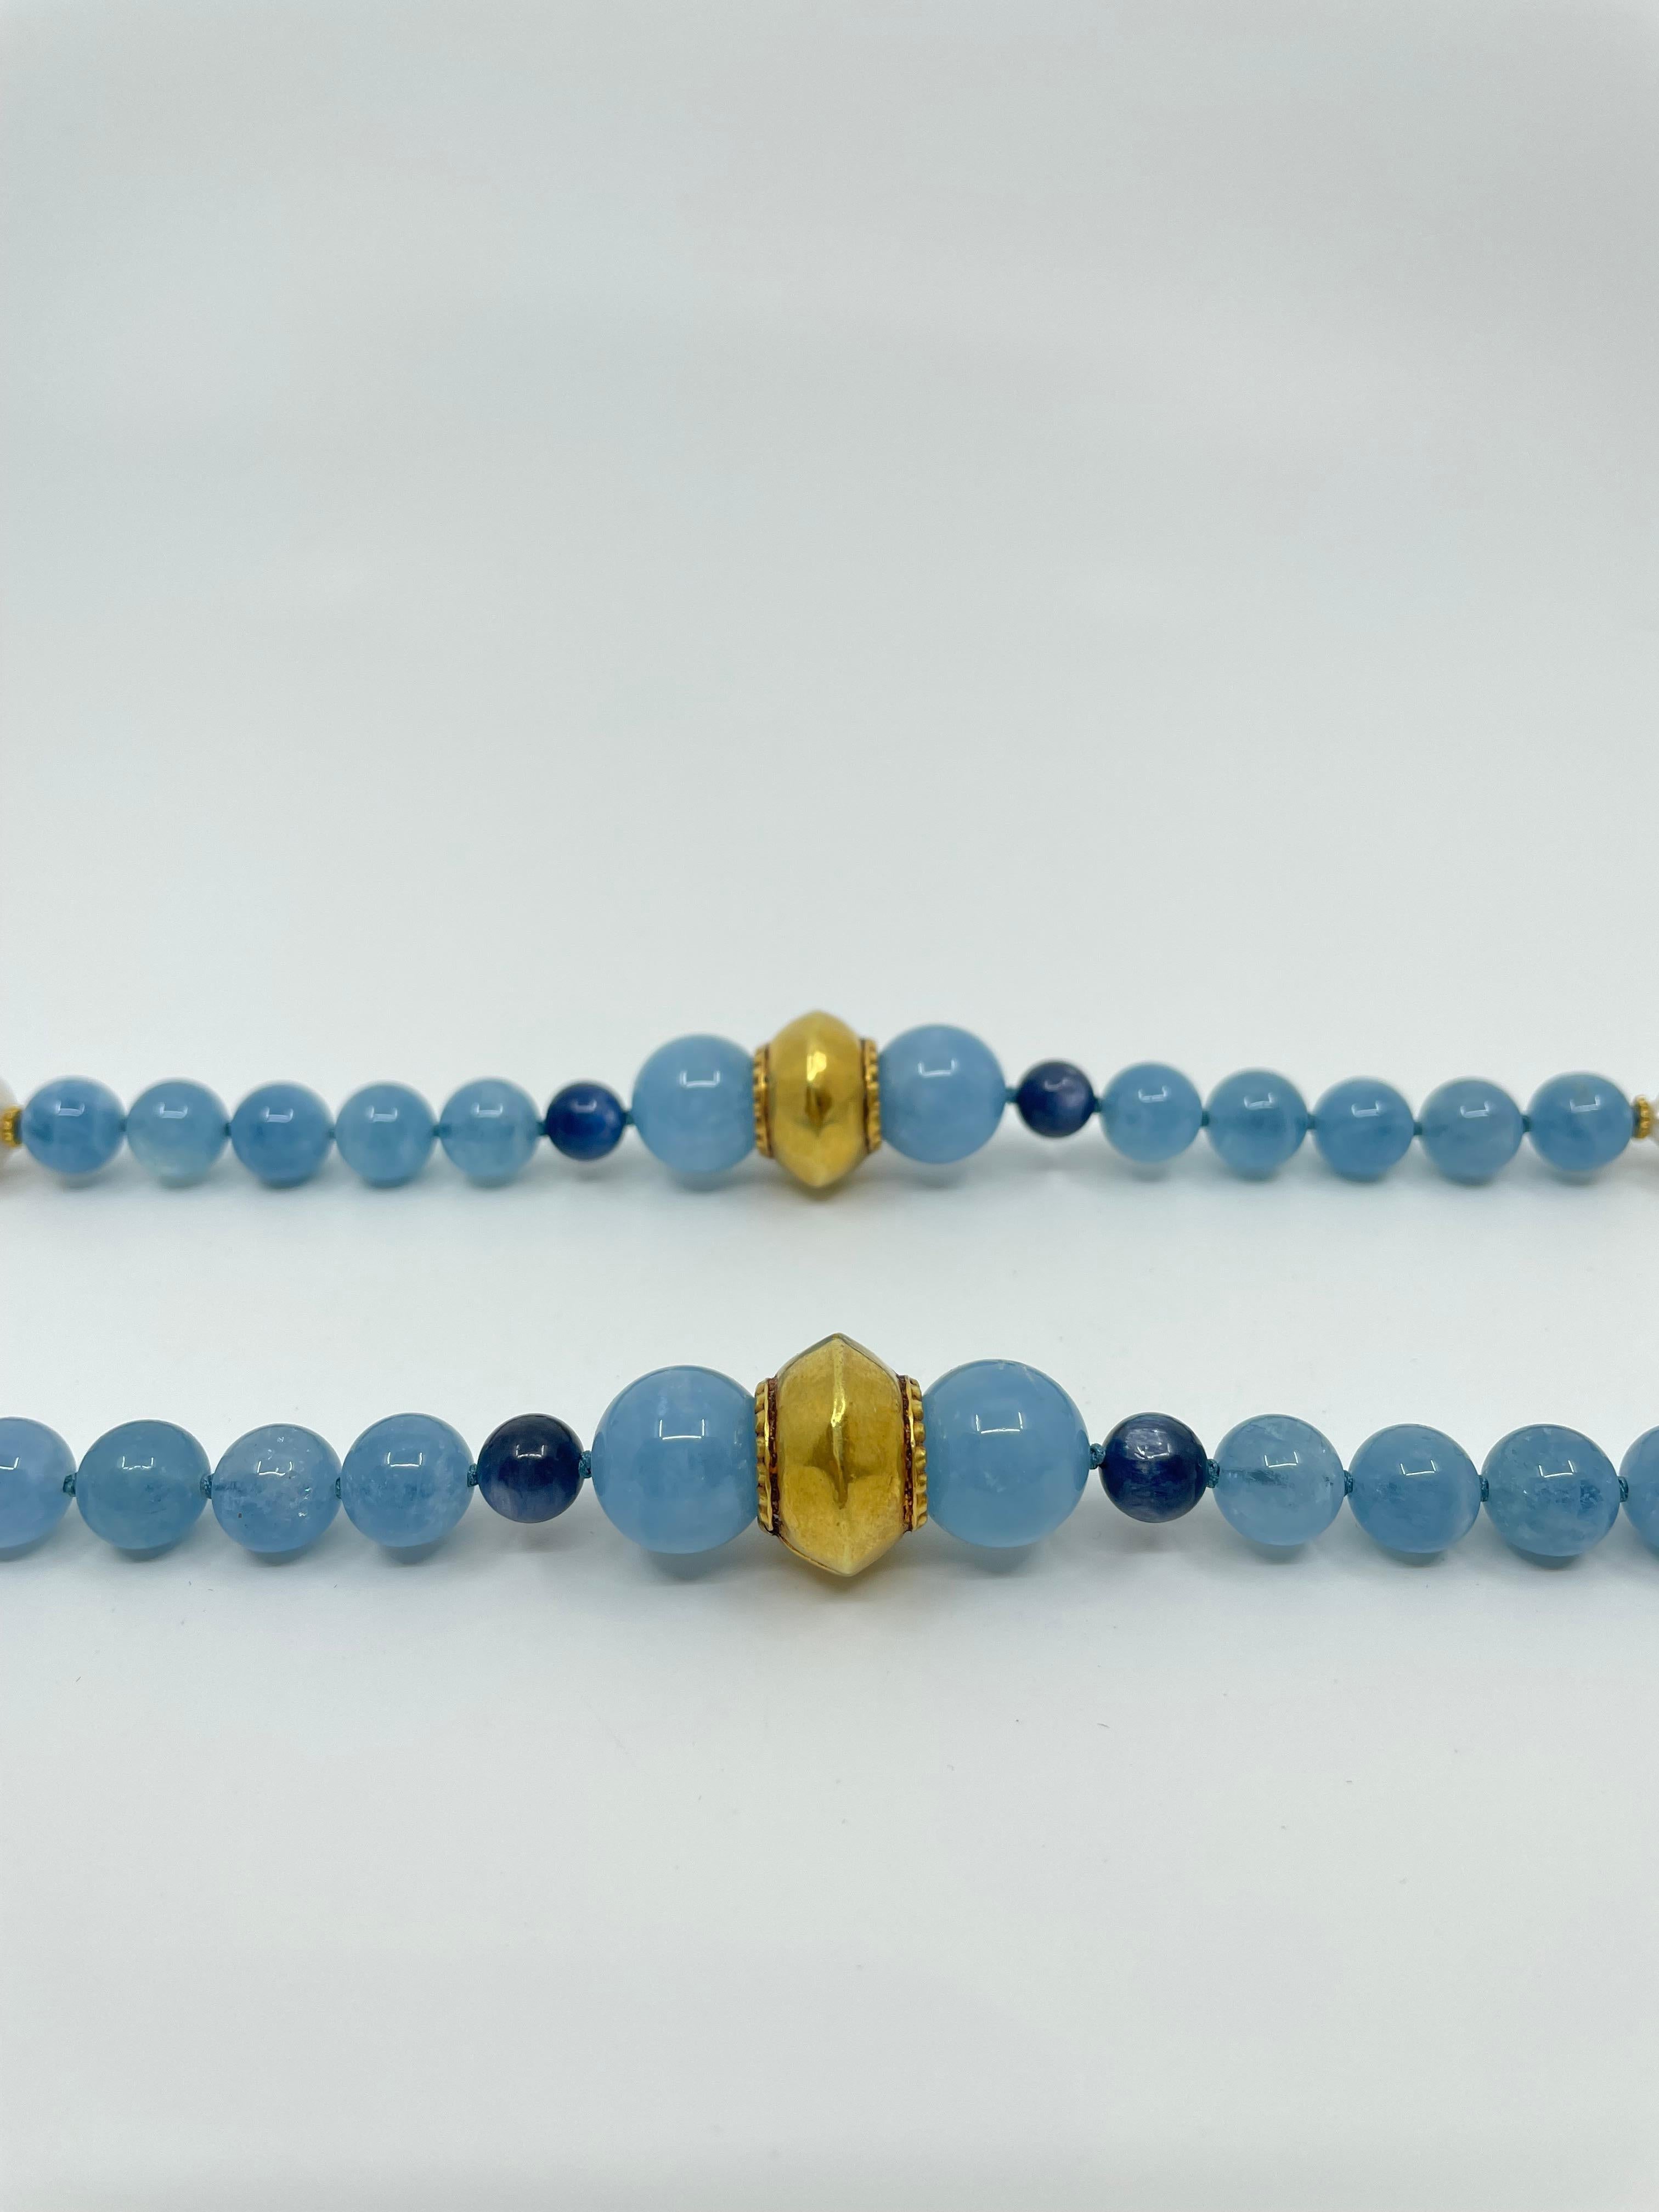 Necklace with Aquamarine, Kyanite, South Sea Pearls, Gold & 18K Gold For Sale 5